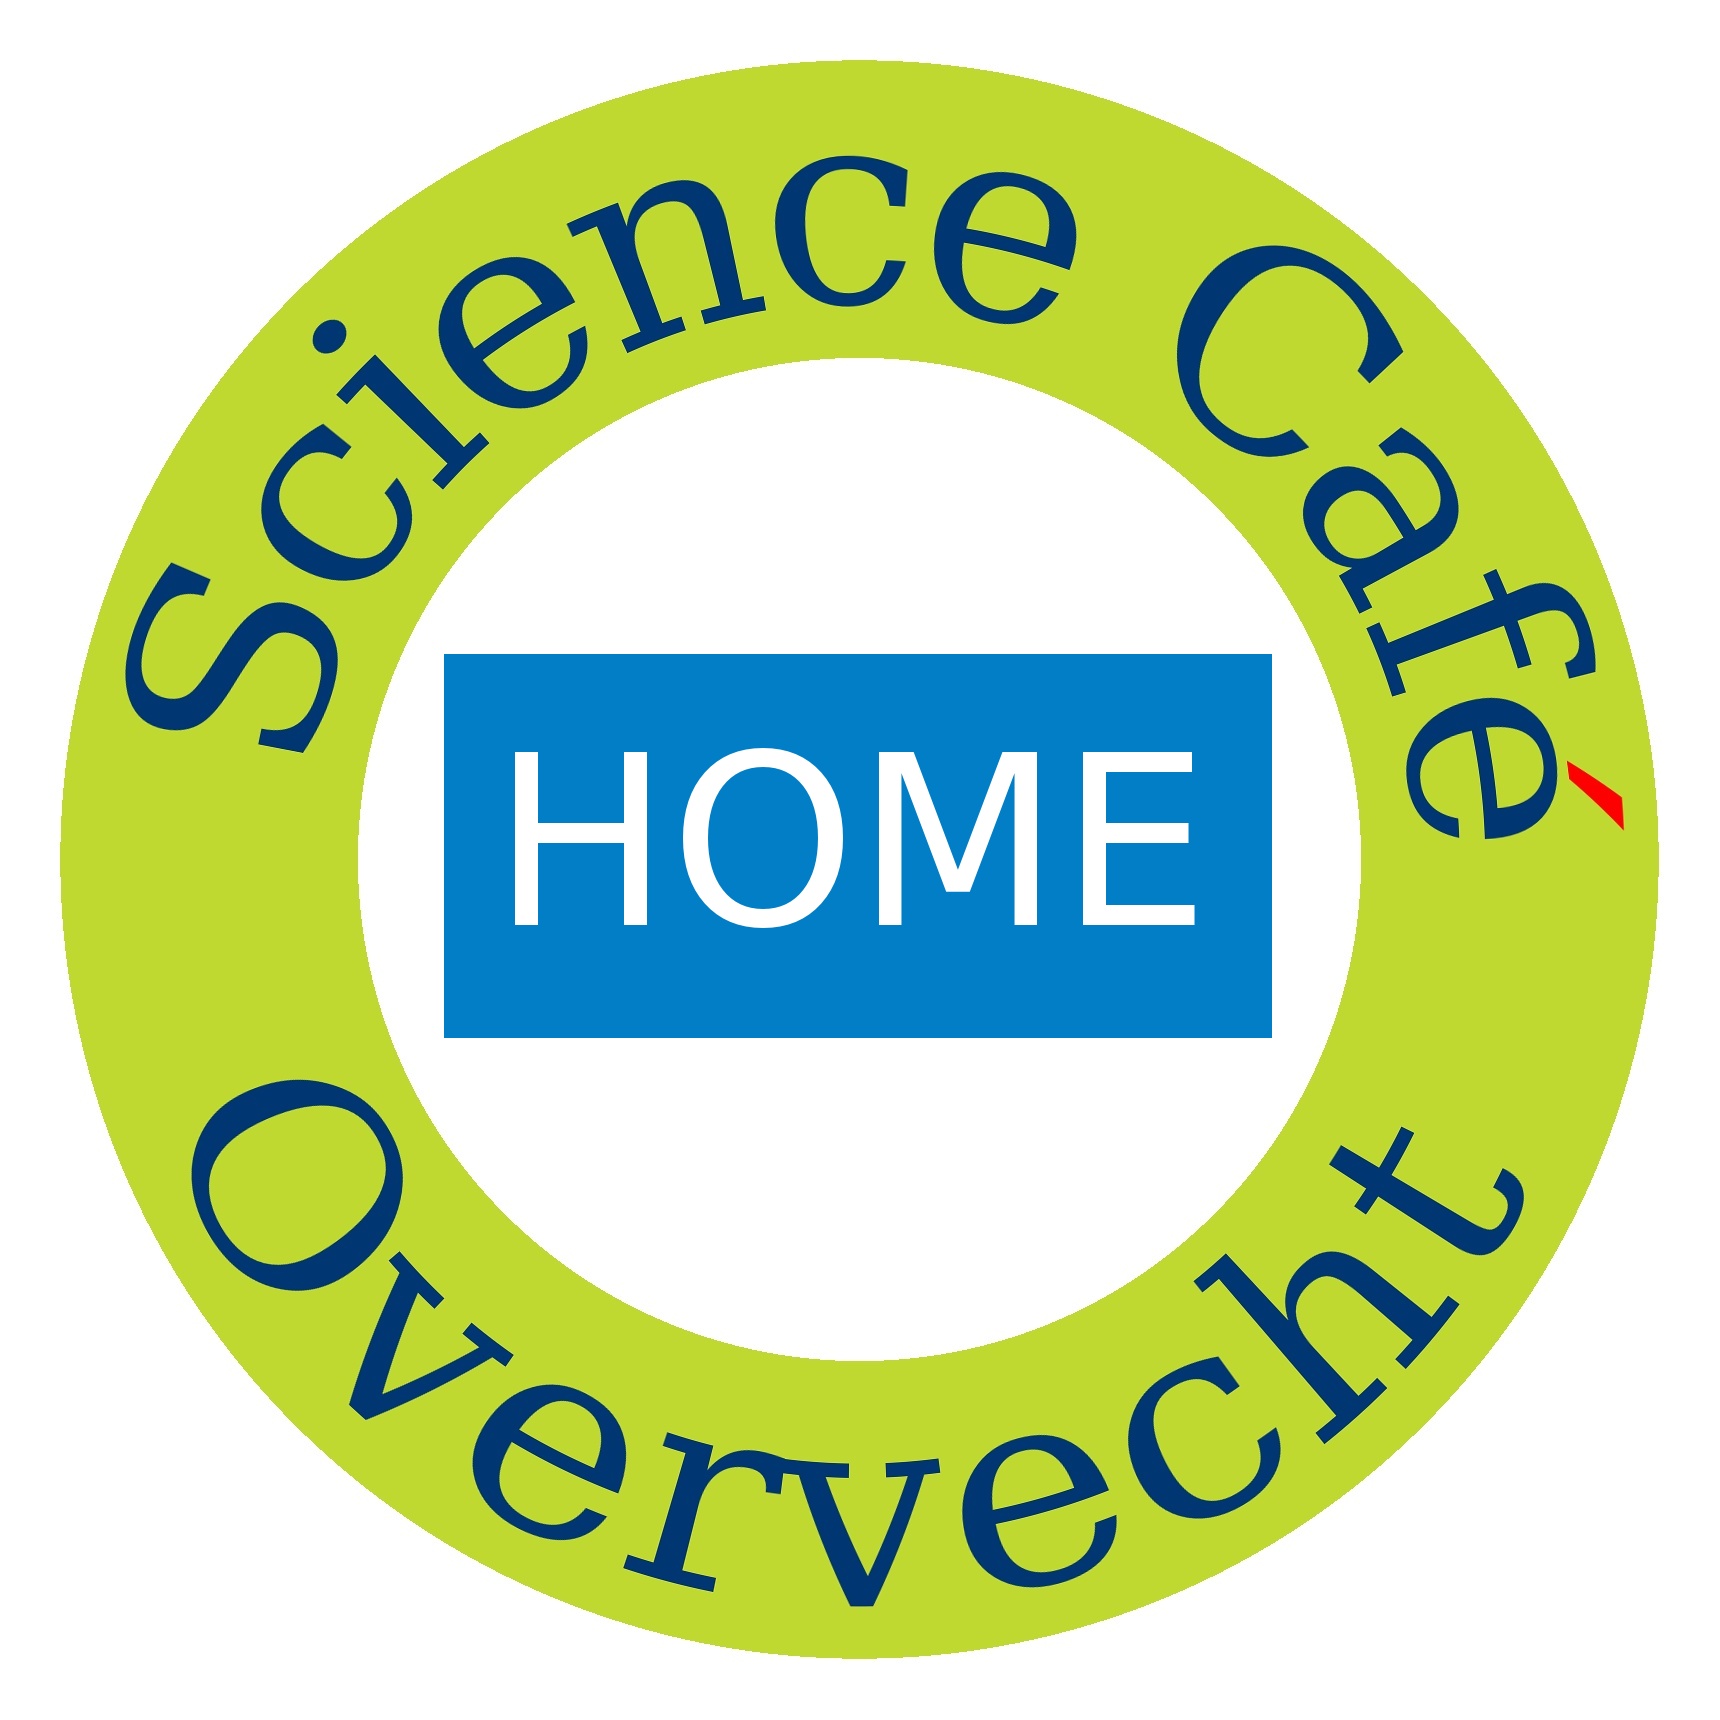 http://www.sciencecafeovervecht.nl/Radiometer/logo-science-cafe-overvecht-home.jpg